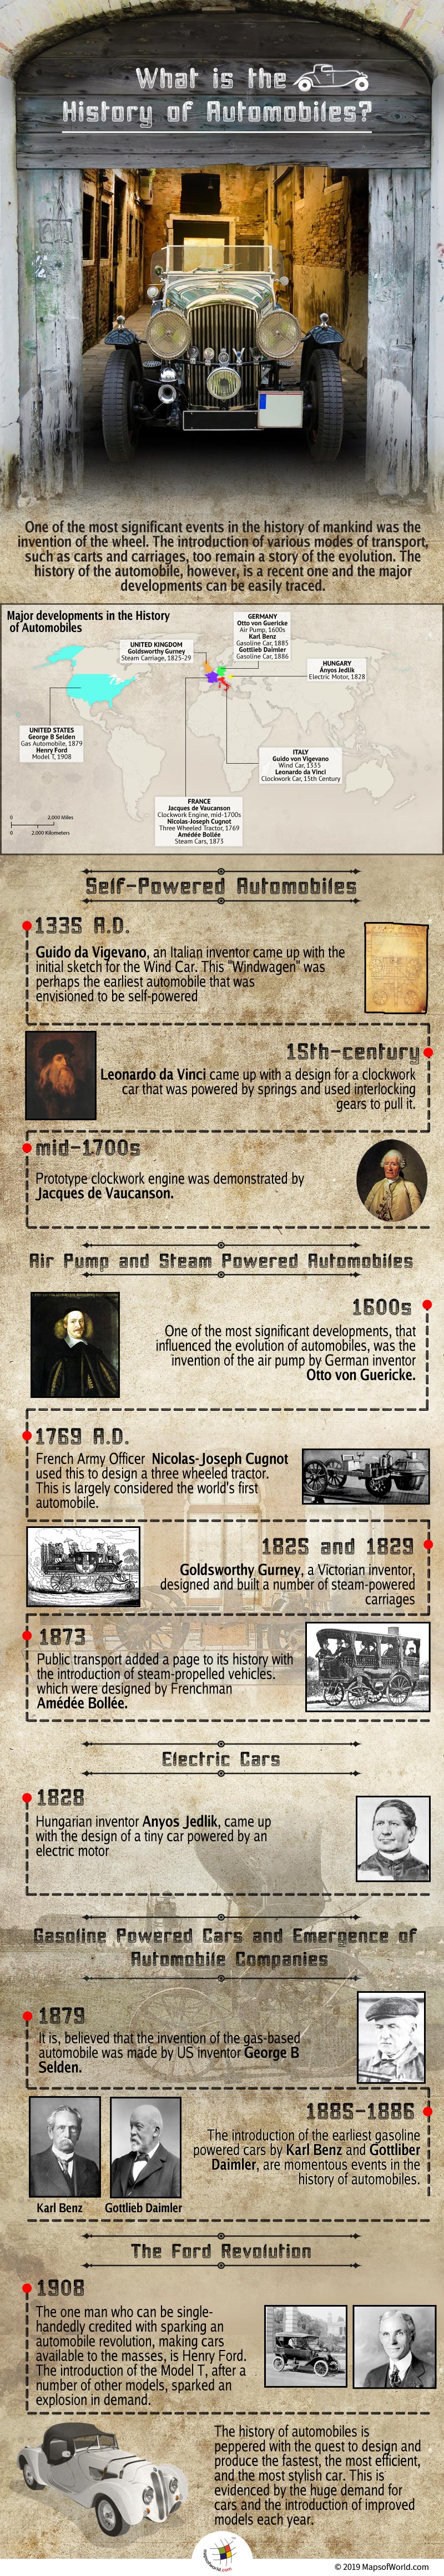 Infographic Giving Details on The History of Automobiles